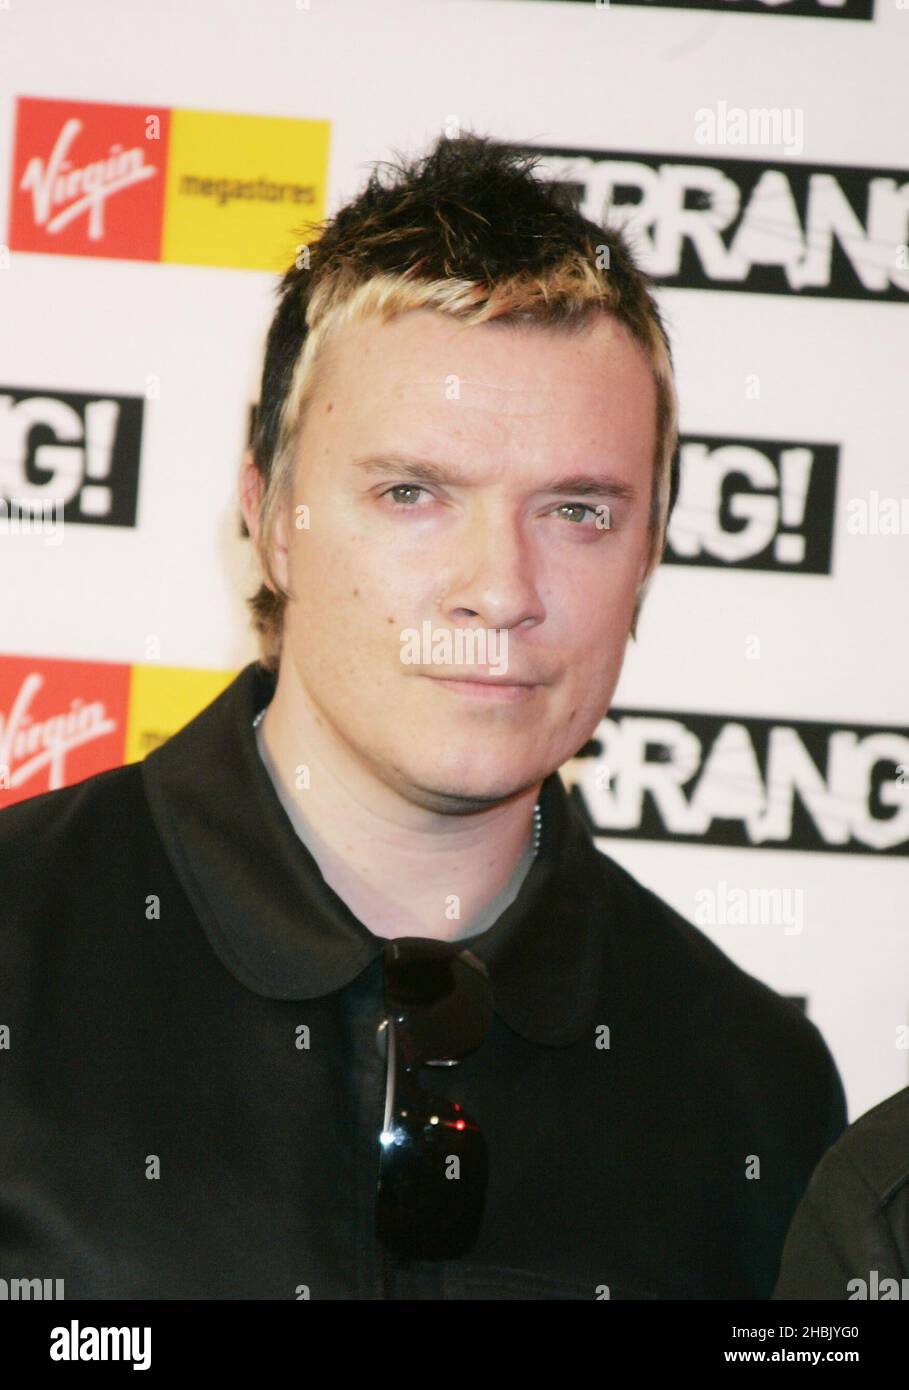 Liam Howlett arriving on the red carpet at the Kerrang Awards. Stock Photo